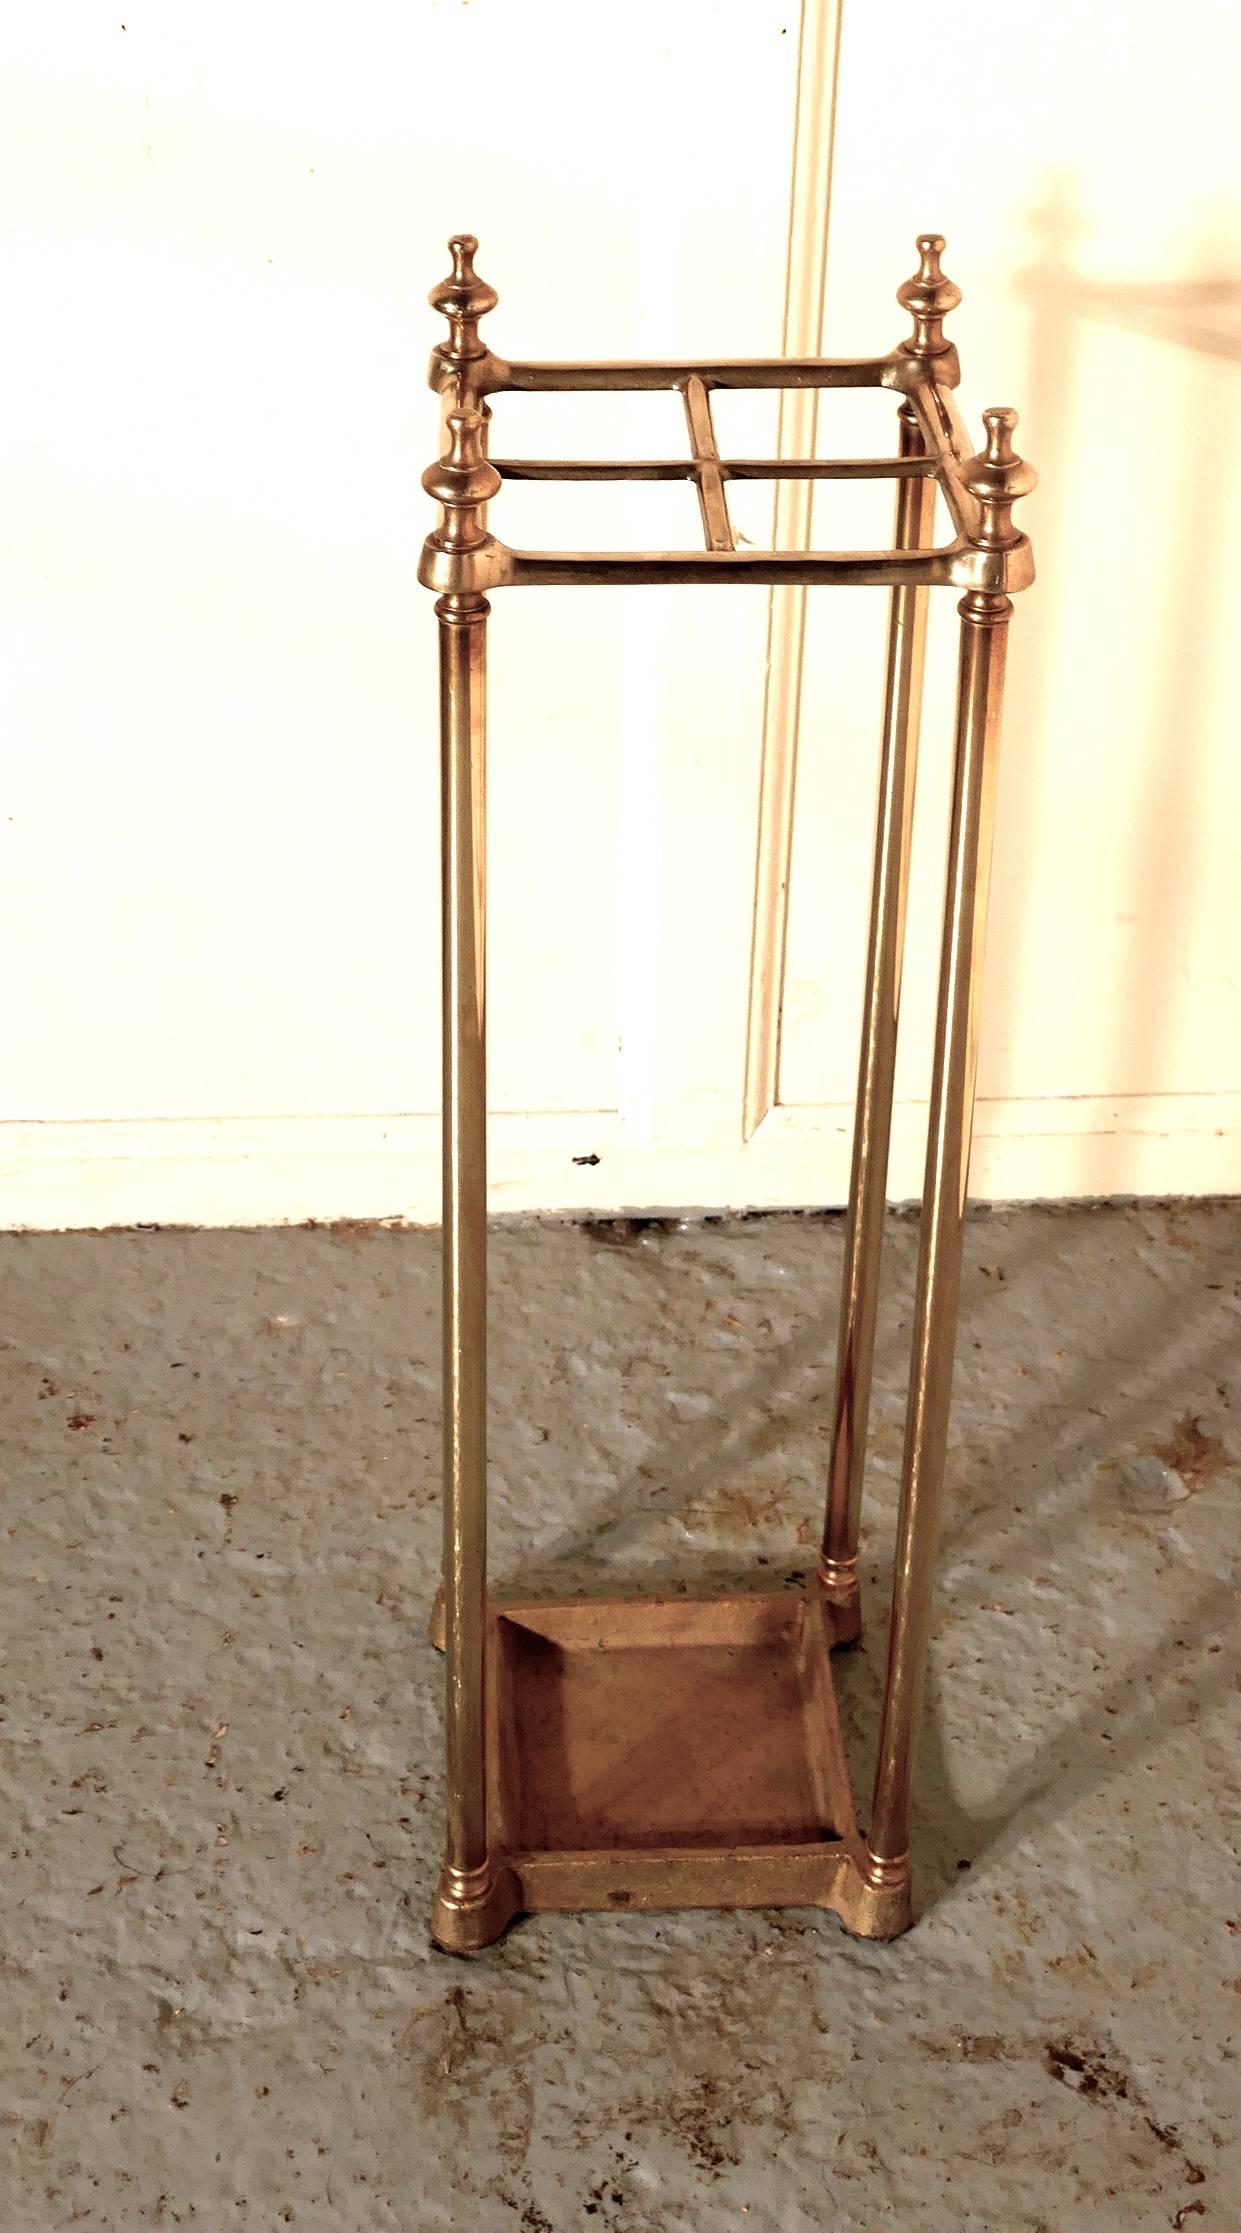 A Victorian brass and cast iron walking stick stand or umbrella stand

A charming piece, the stand has a brass top divided into four sections to hold either walking sticks or umbrellas, the heavy iron base which is painted in gold is also the drip